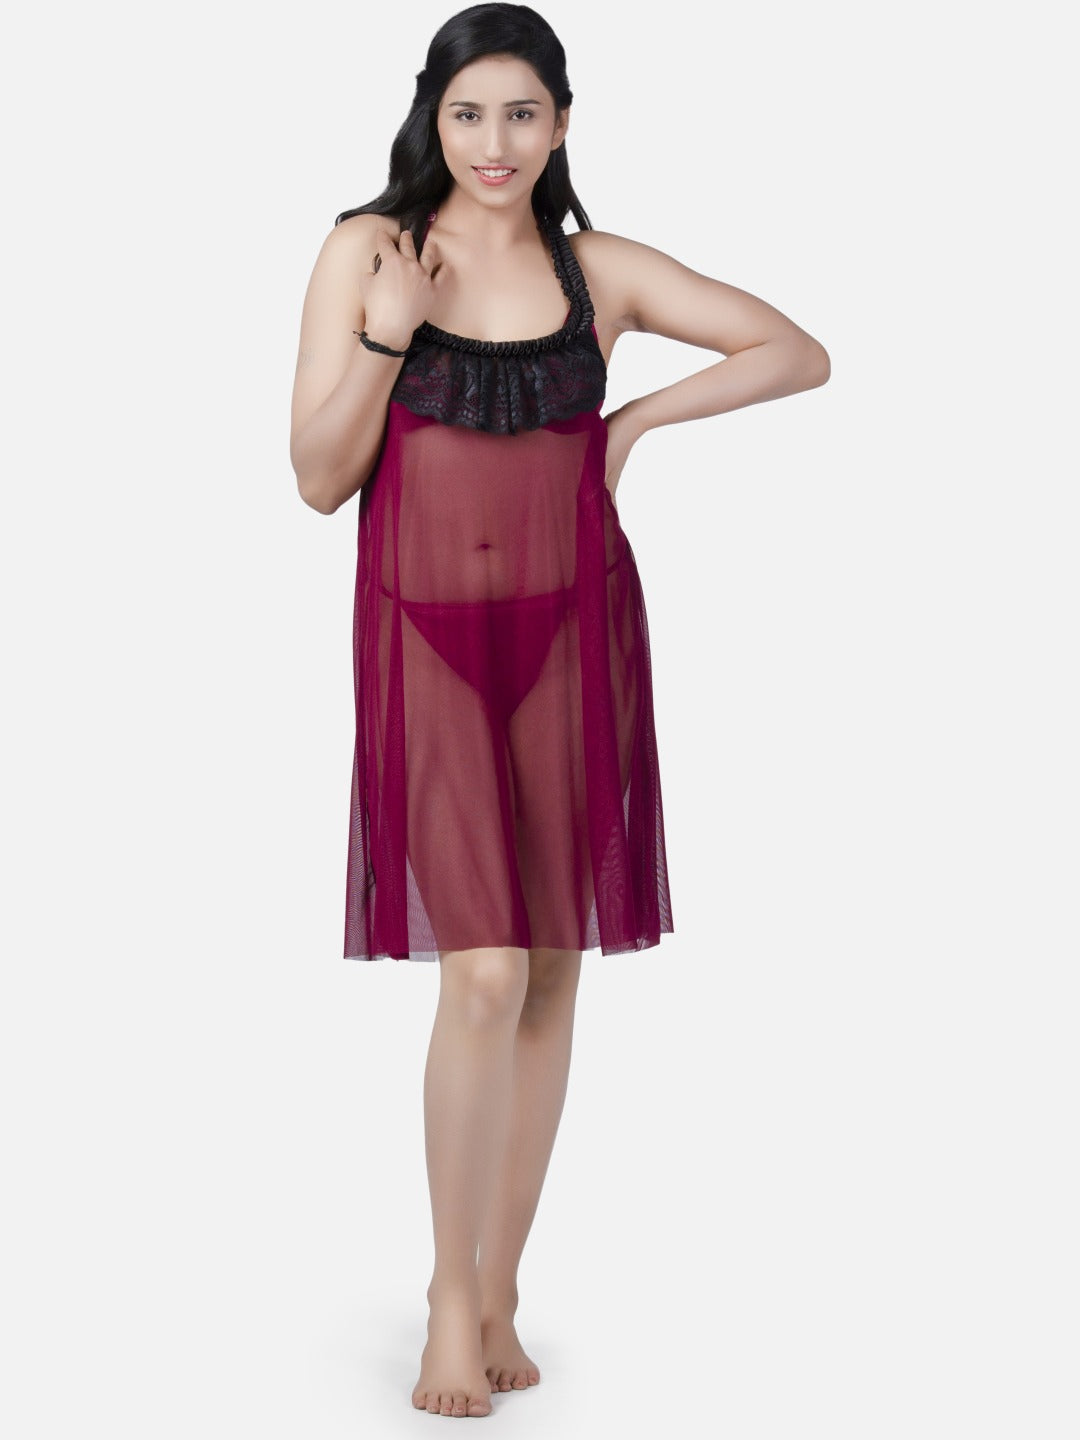 An extremely sexy, all-lace transparent nightdress.